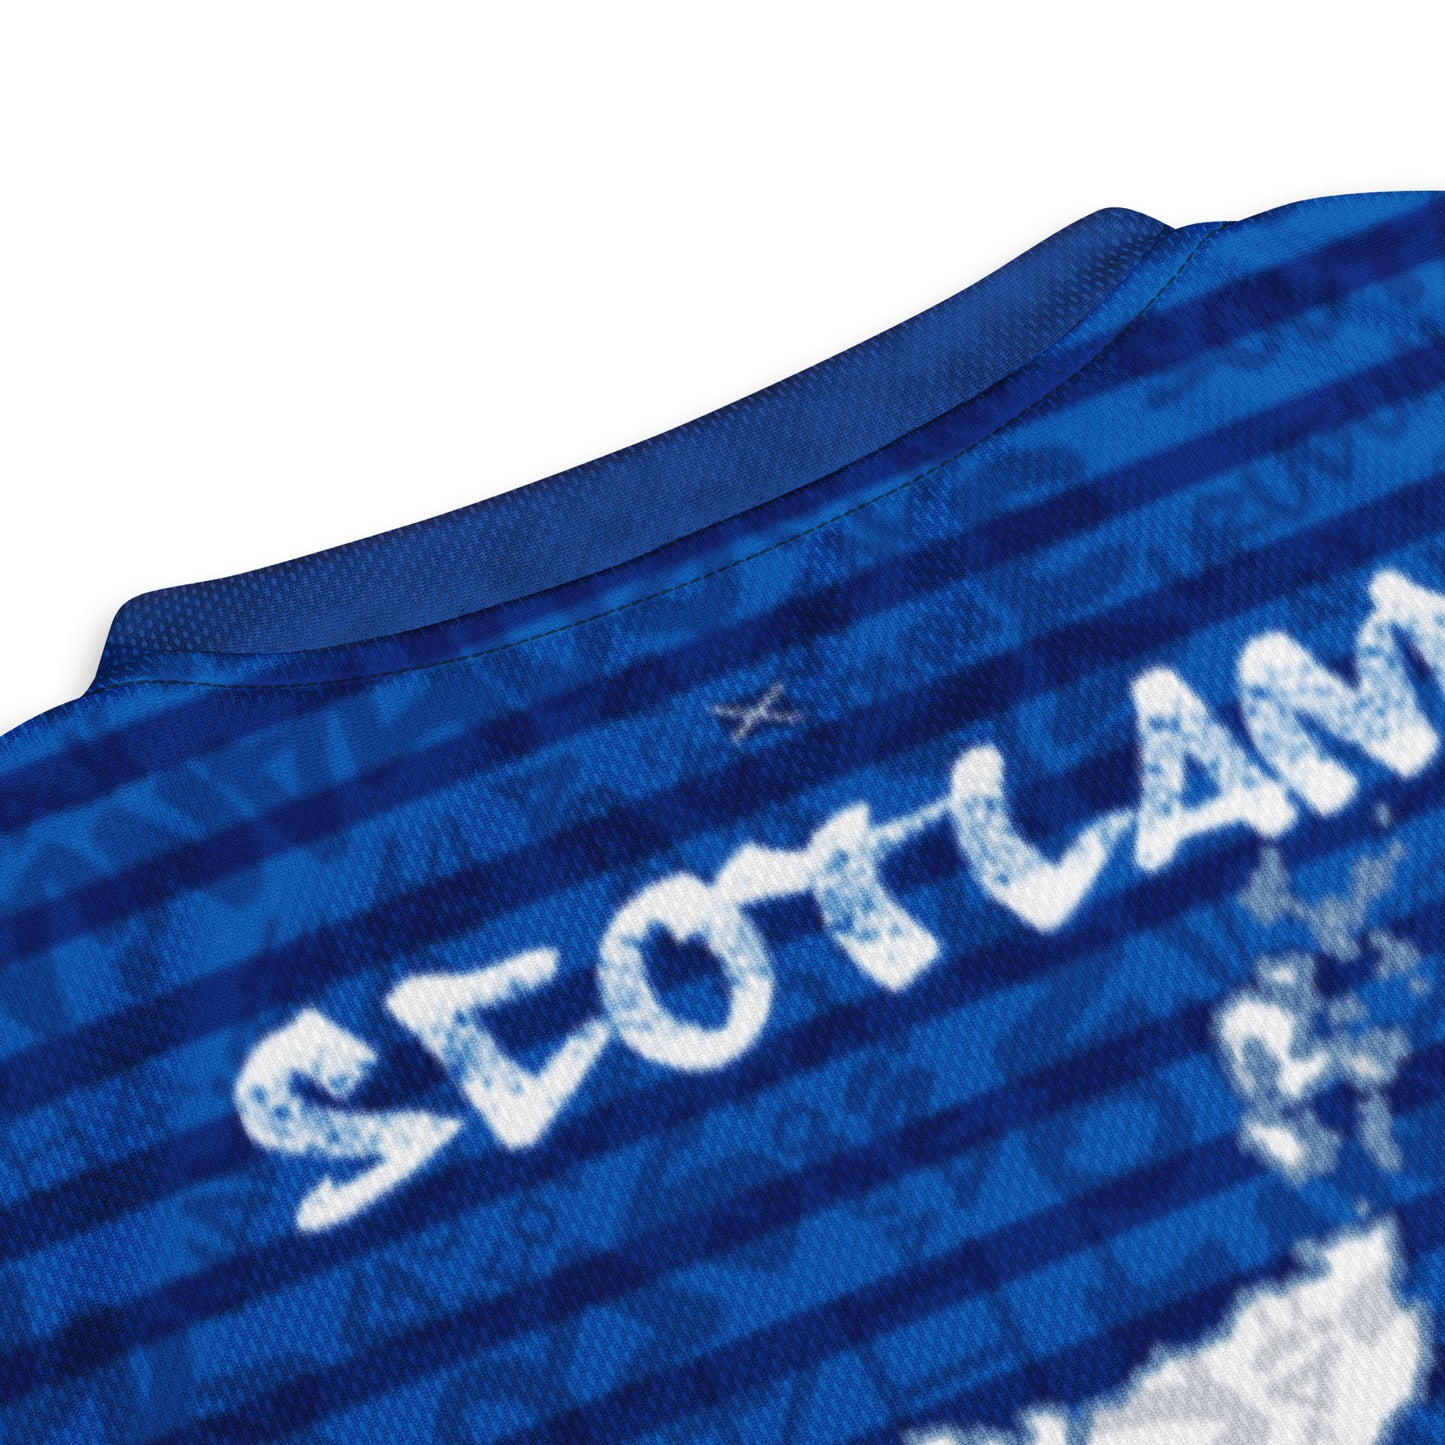 t-shirt jomelo rugby Ecosse